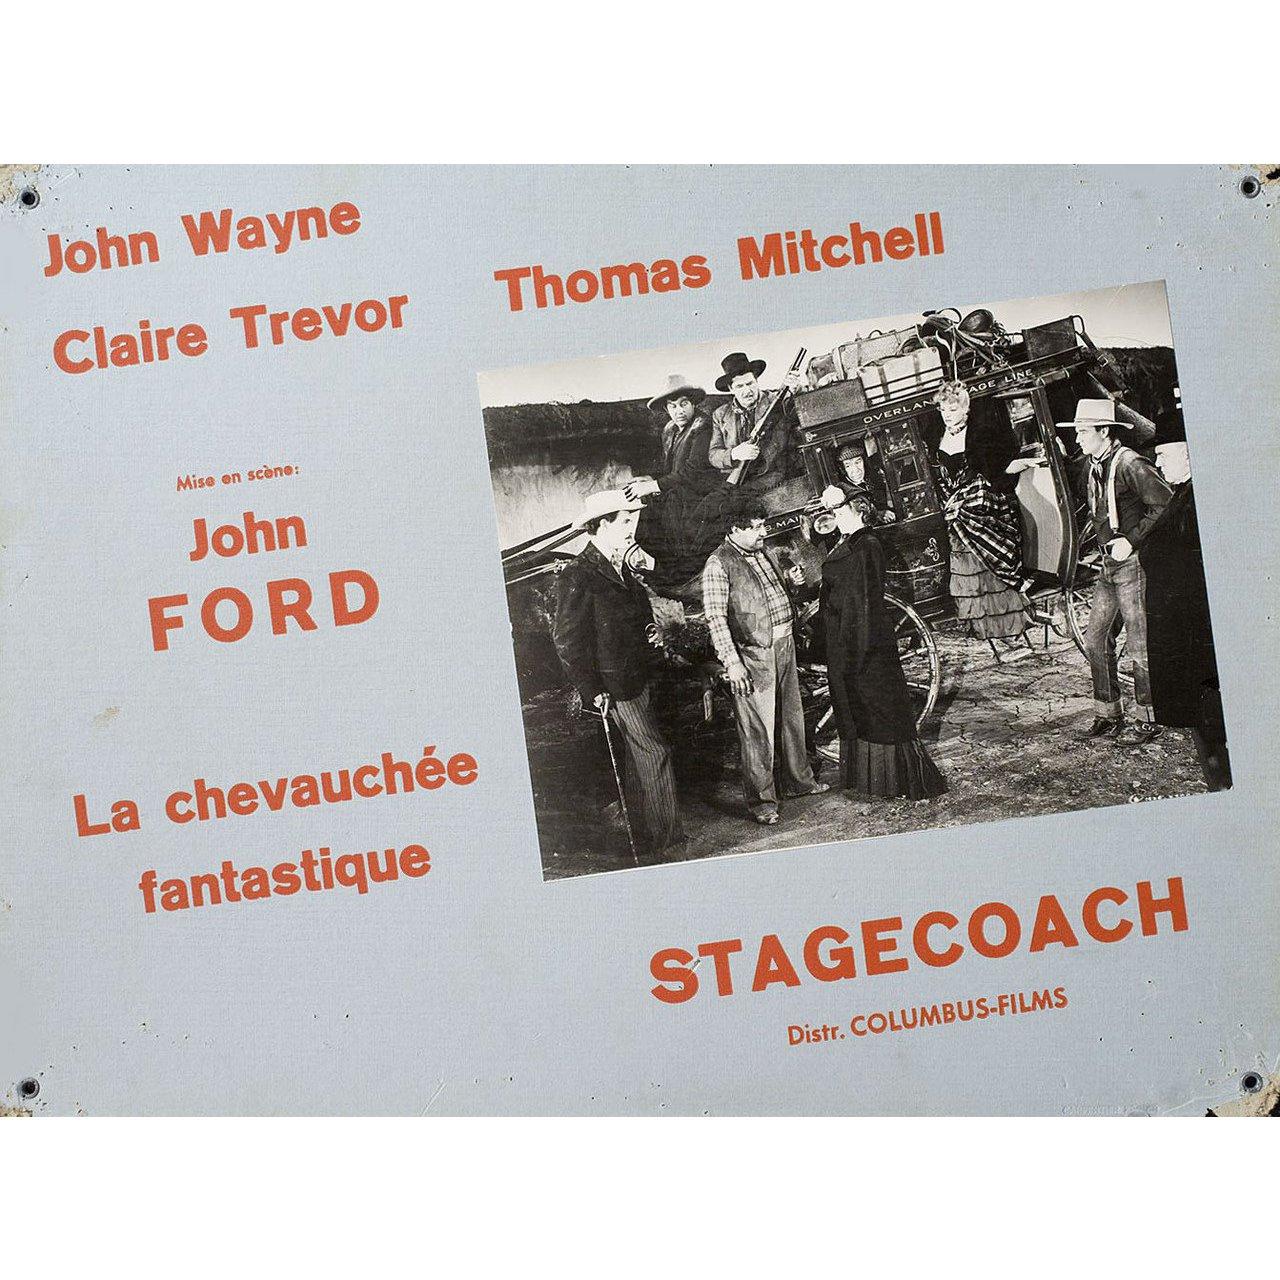 Original 1970s Swiss scene card for the 1939 film “Stagecoach” directed by John Ford with Claire Trevor / John Wayne / Andy Devine / John Carradine. Very good condition. Please note: the size is stated in inches and the actual size can vary by an